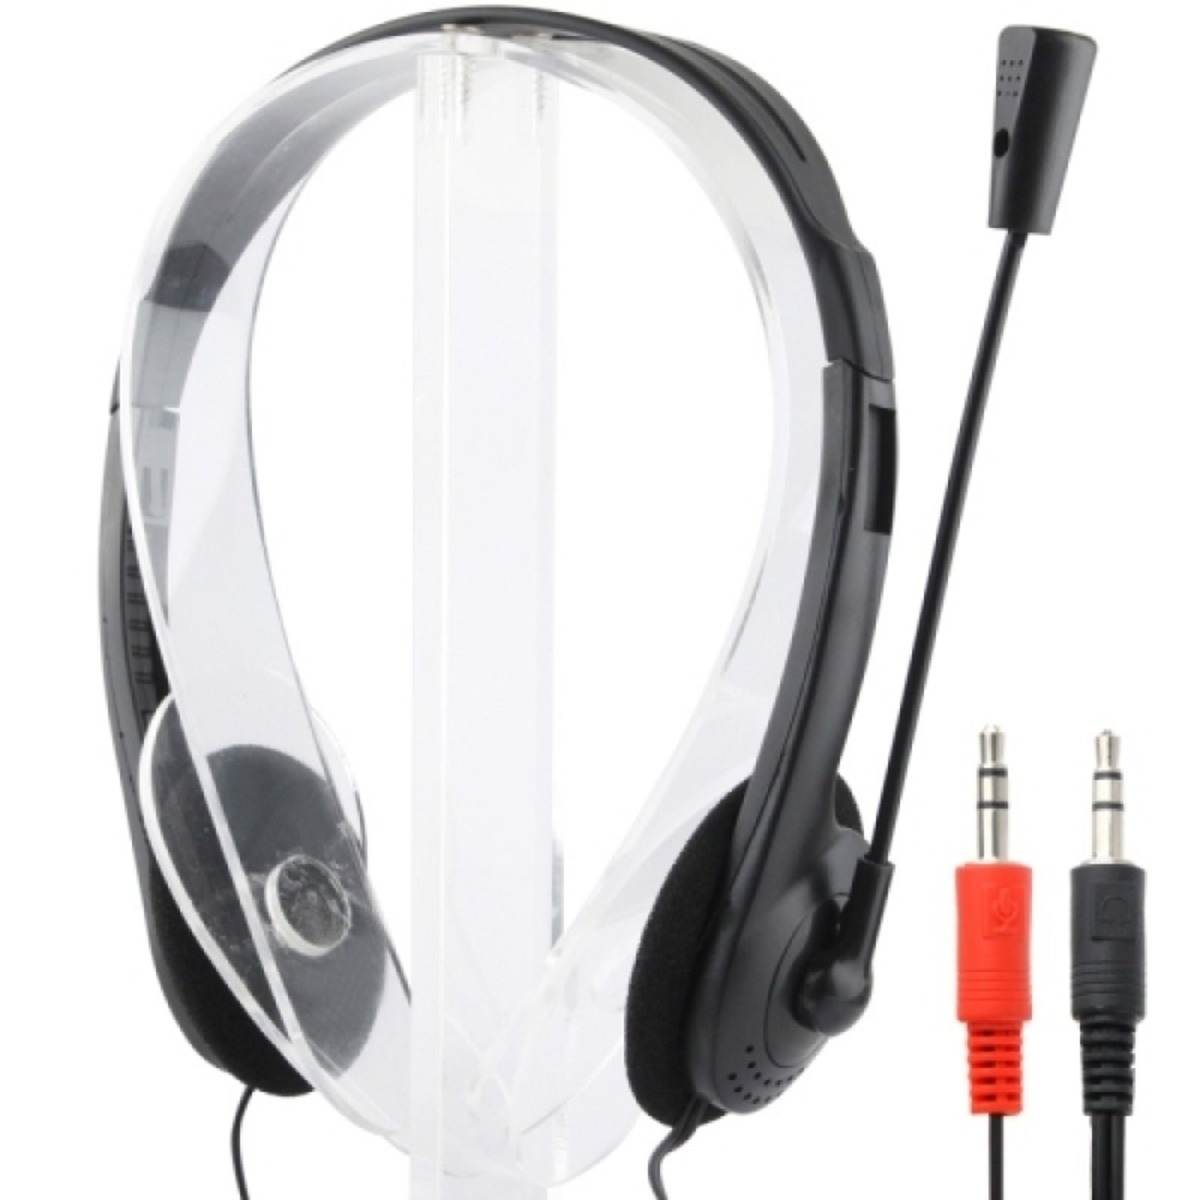 Iends Stereo High Quality Multimedia Headset with Microphone HS930